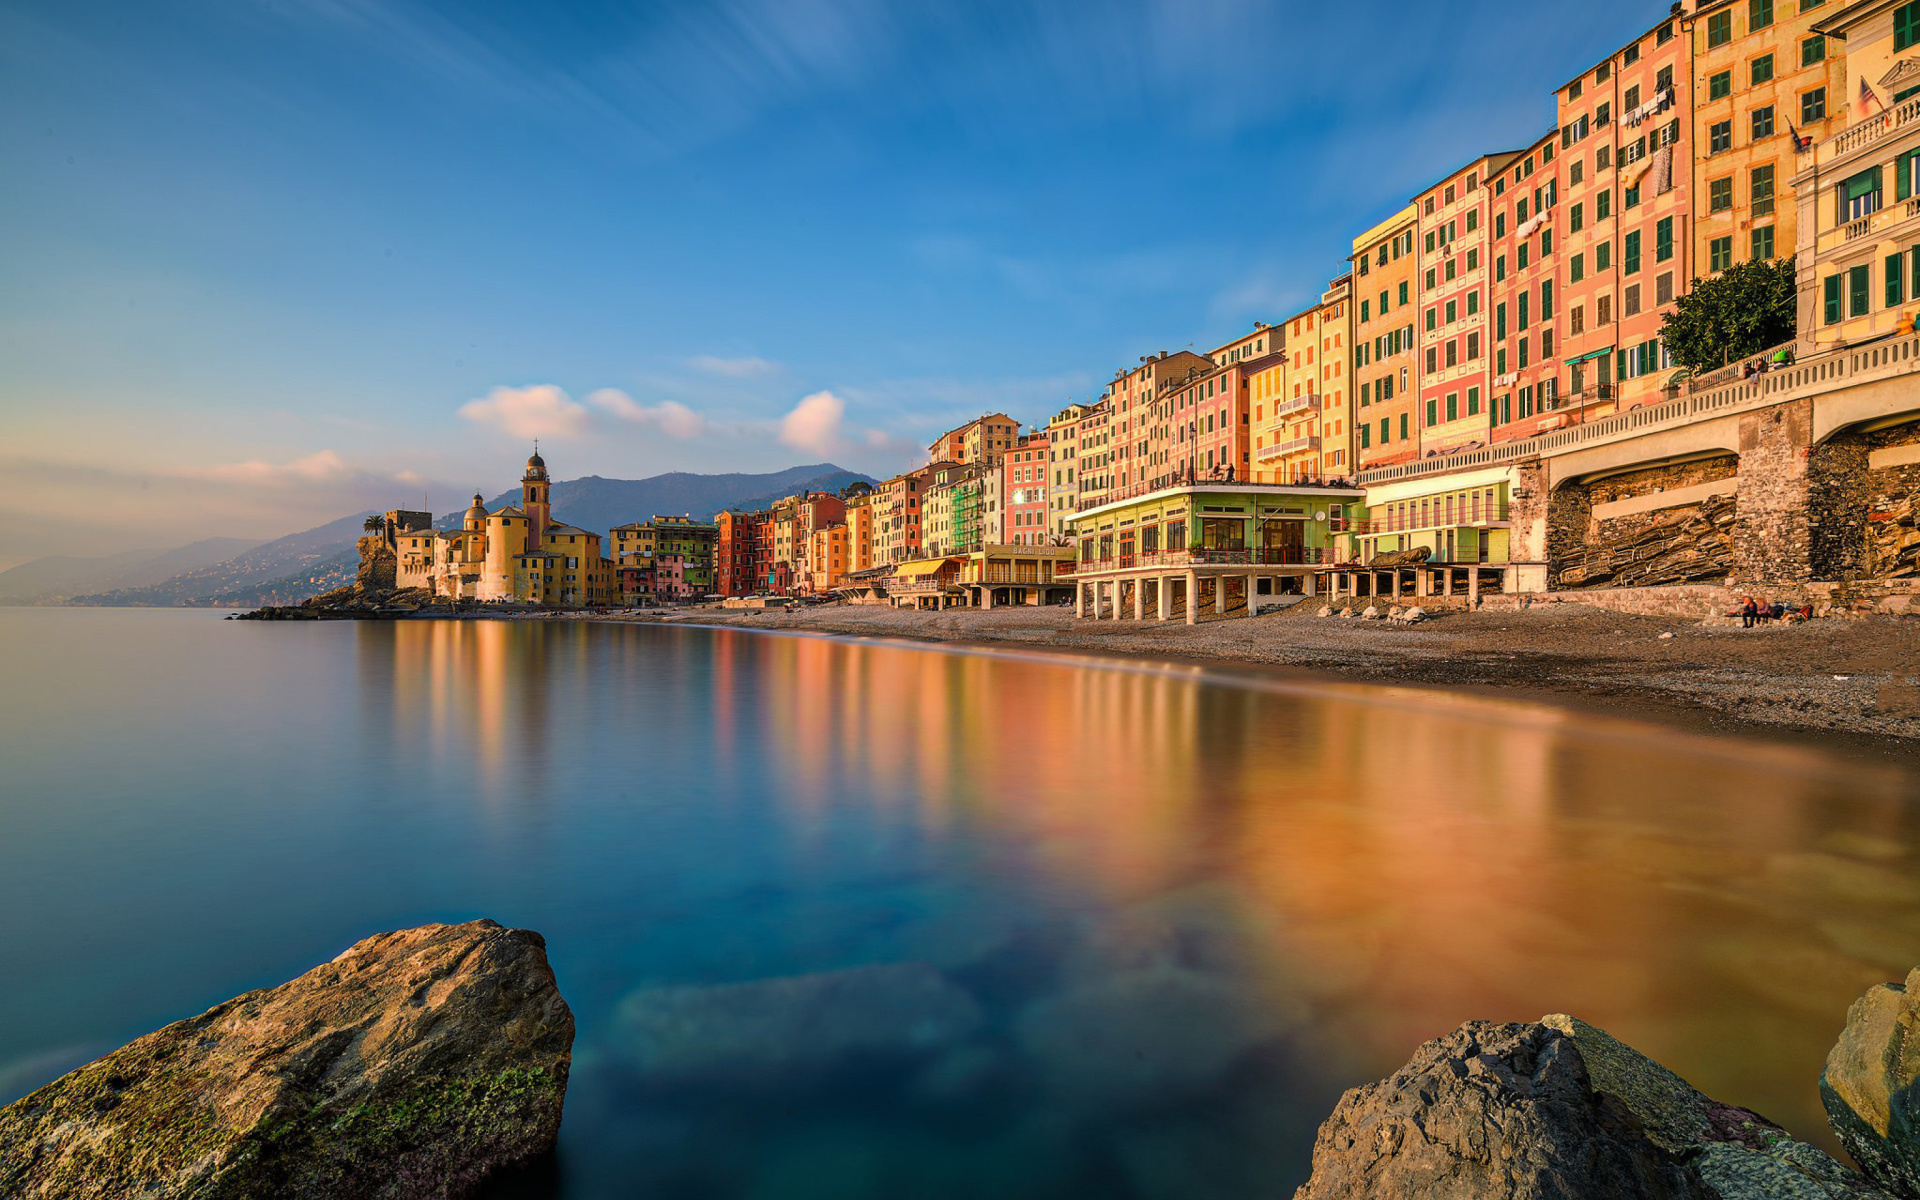 man made, portofino, coast, colorful, colors, house, italy, town, towns